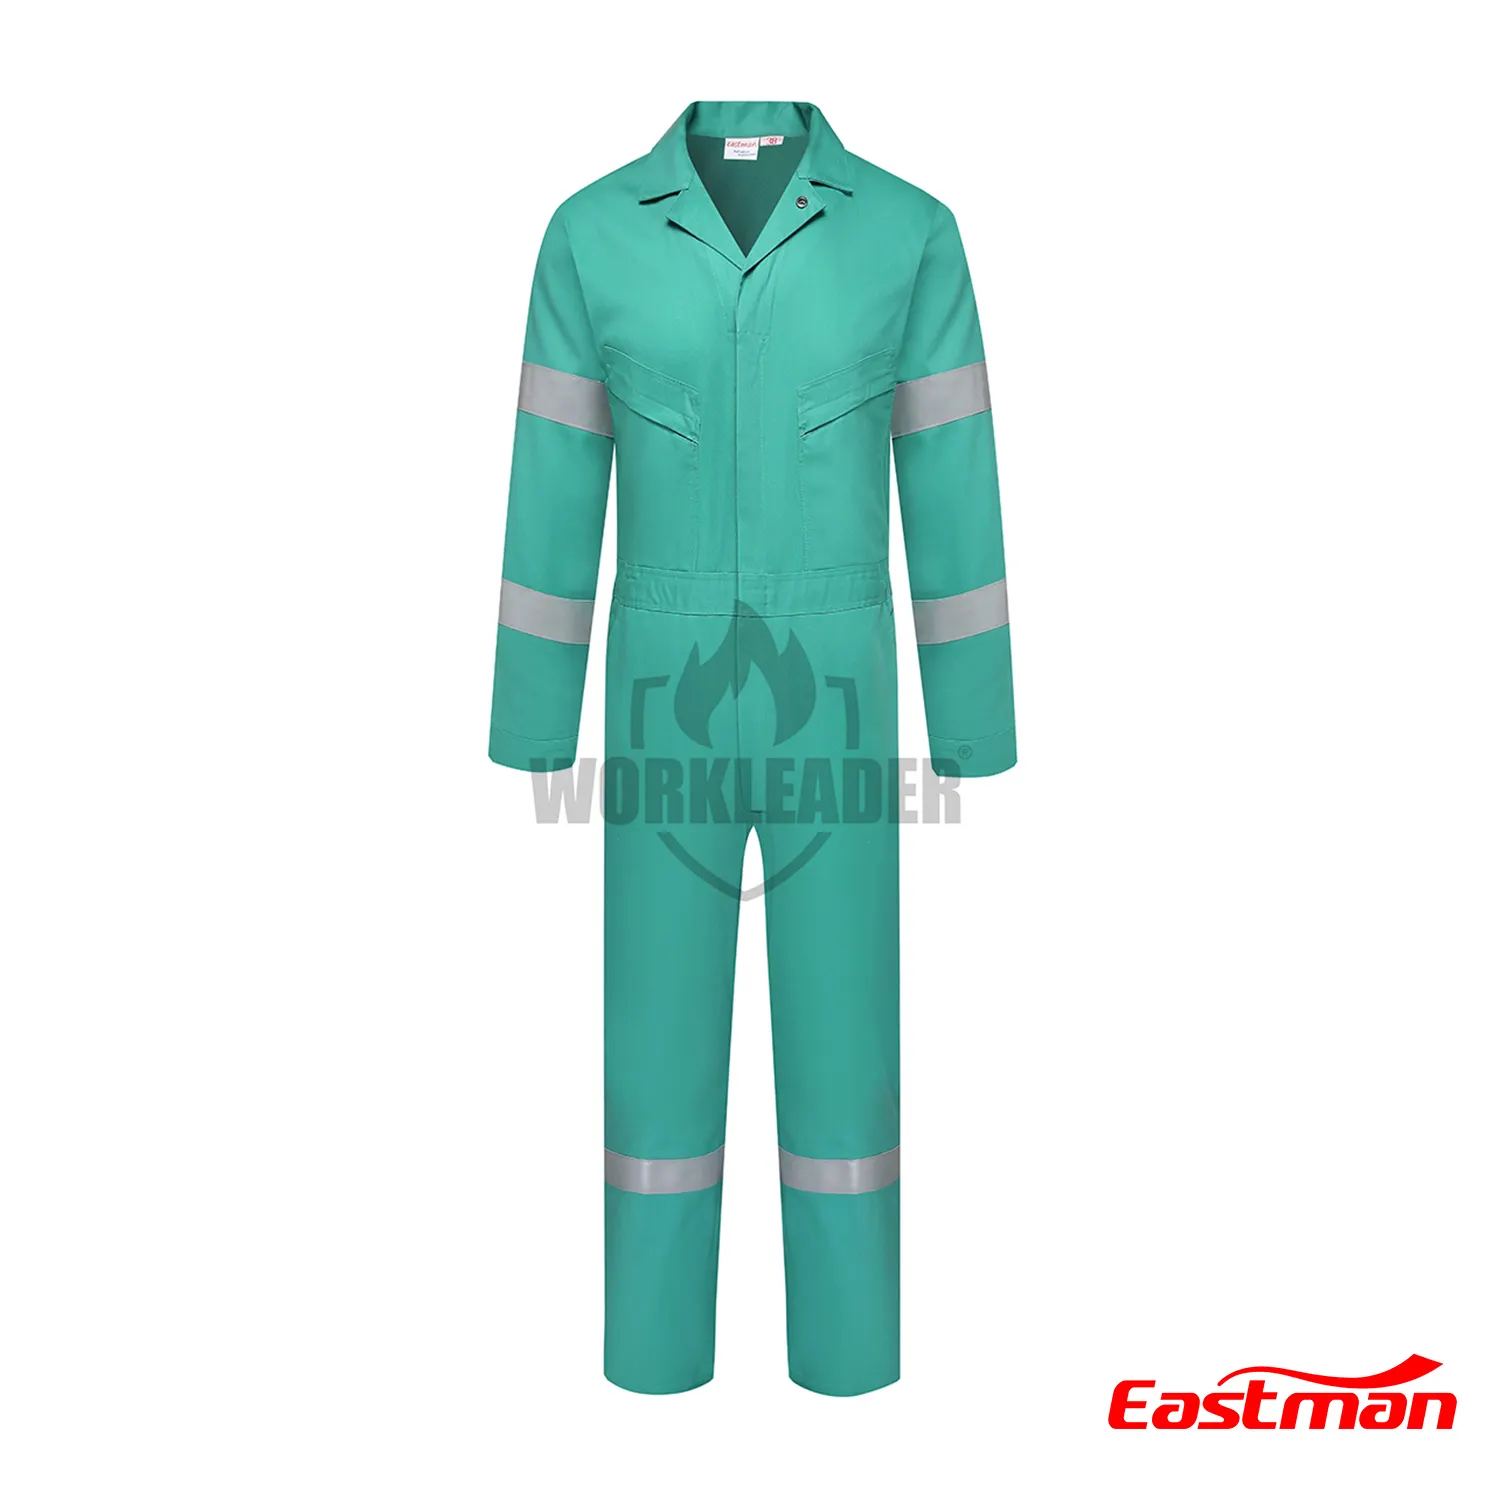 WORKLEADER Flame Resistant Coverall 3119R